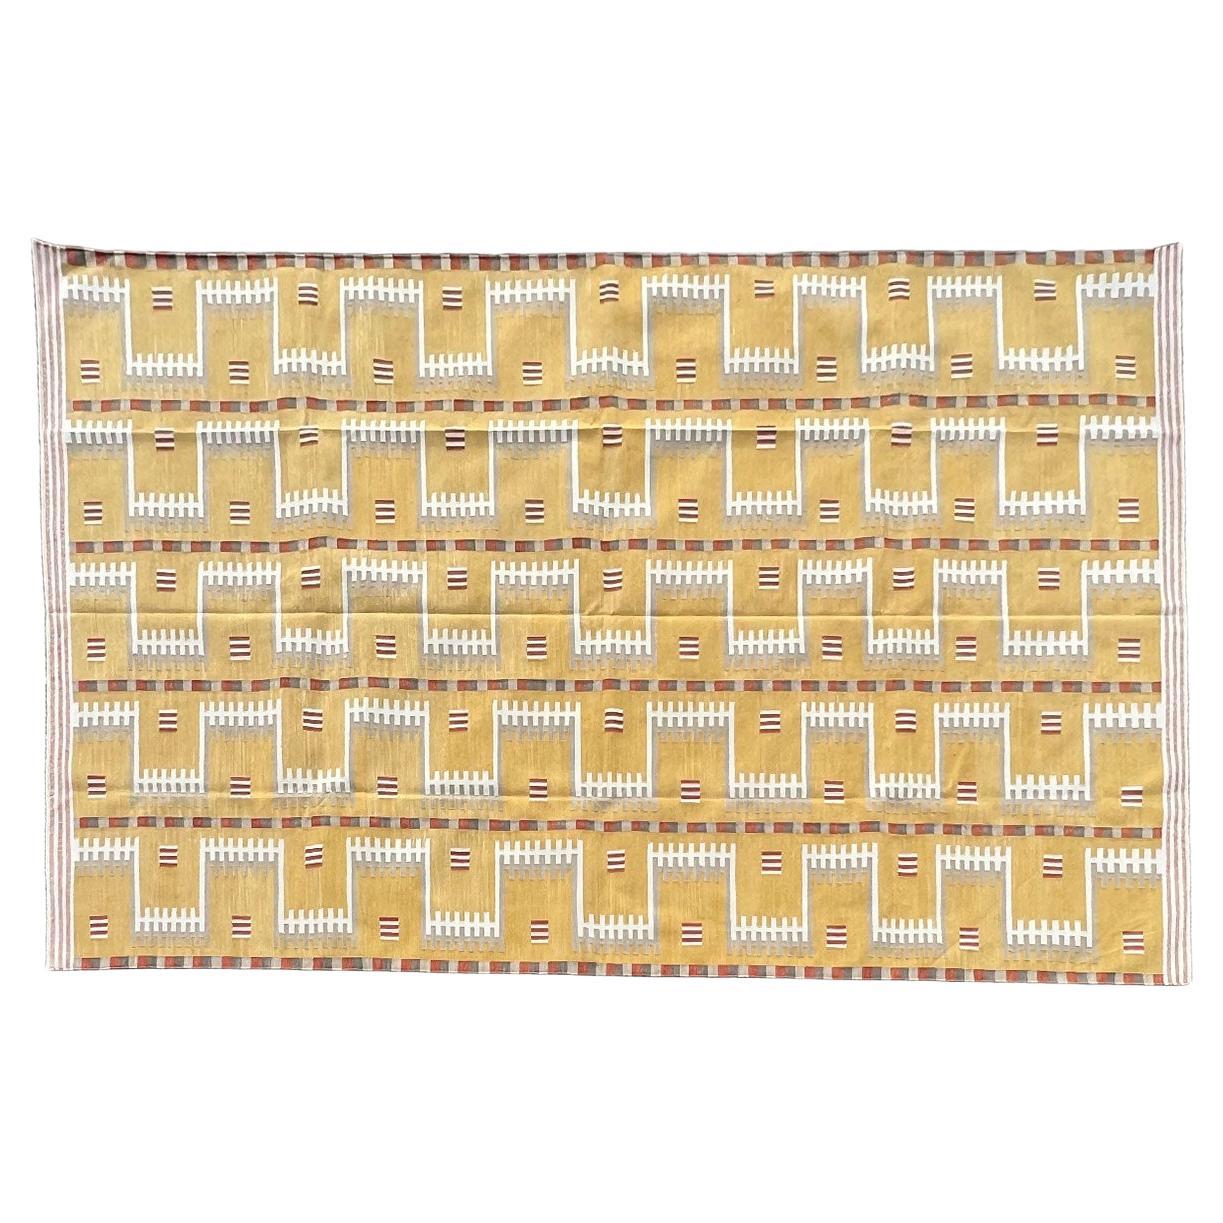 Cotton Natural Vegetable Dyed, Mustard, Cream & Beige Geometric Indian Dhurrie-5'x7'
These special flat-weave dhurries are hand-woven with 15 ply 100% cotton yarn. Due to the special manufacturing techniques used to create our rugs, the size and